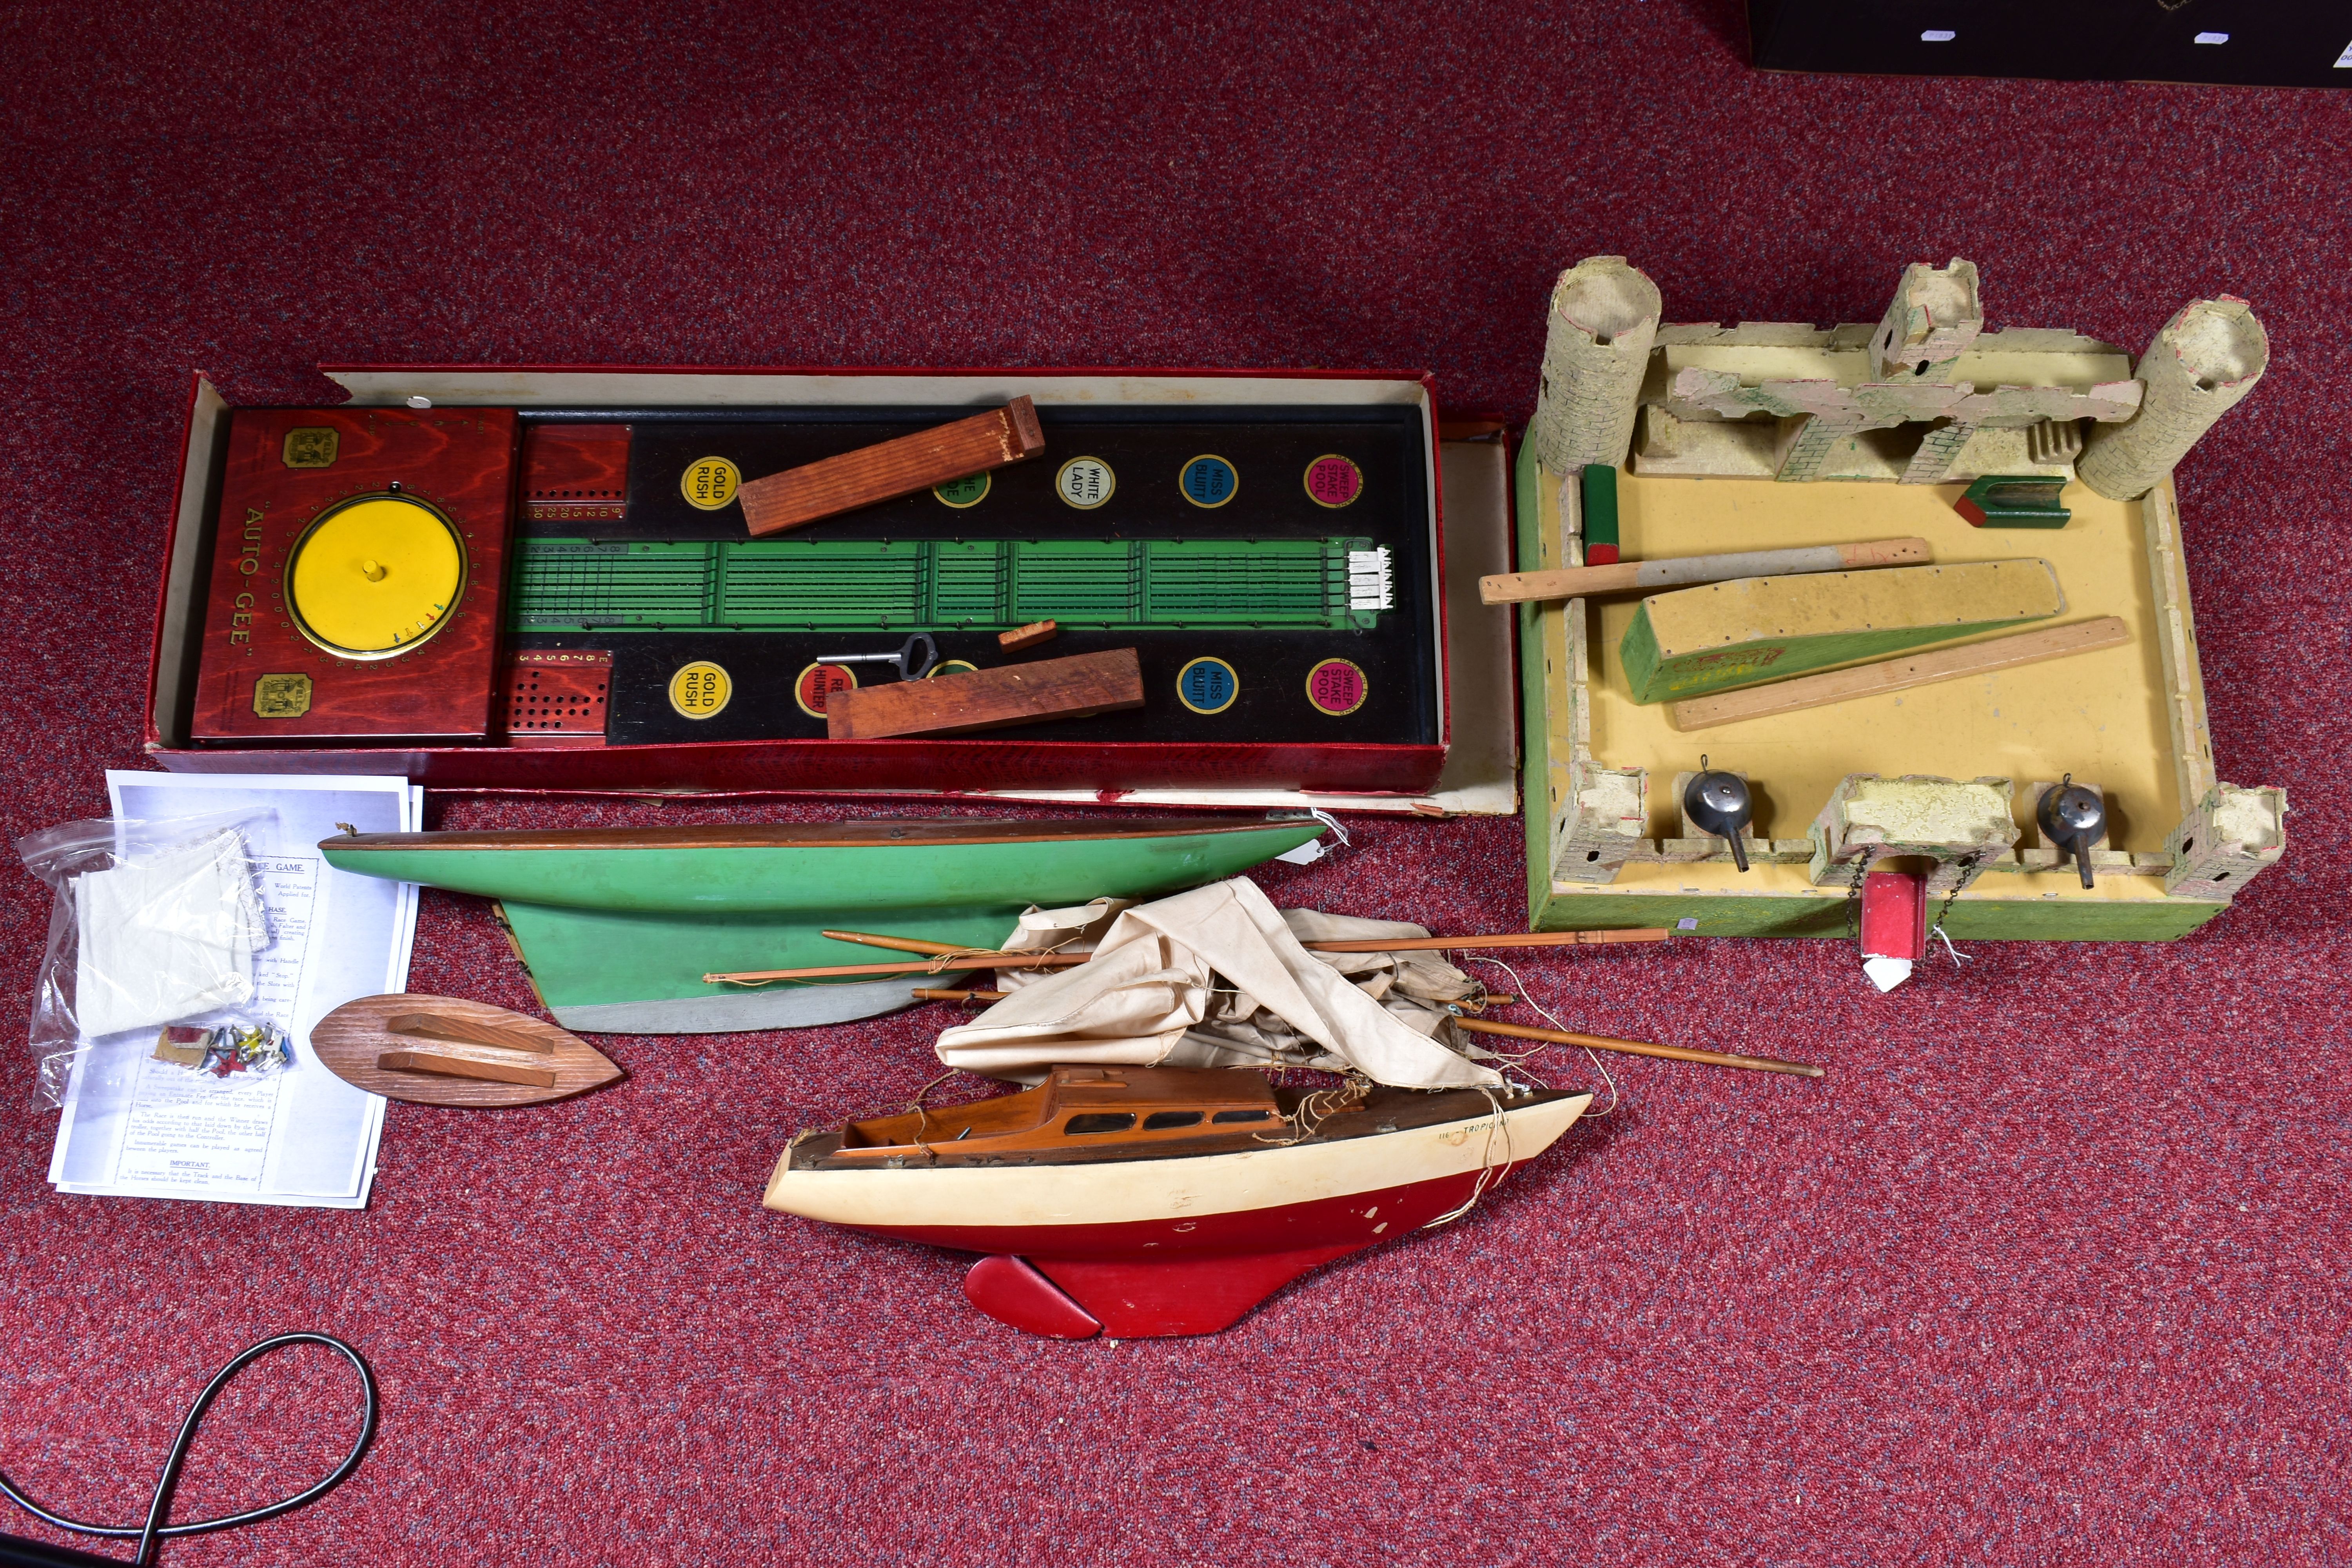 A BOXED WELLS AUTO-GEE HORSE RACING GAME, c.1927, not tested, missing one horse and two pegs, but